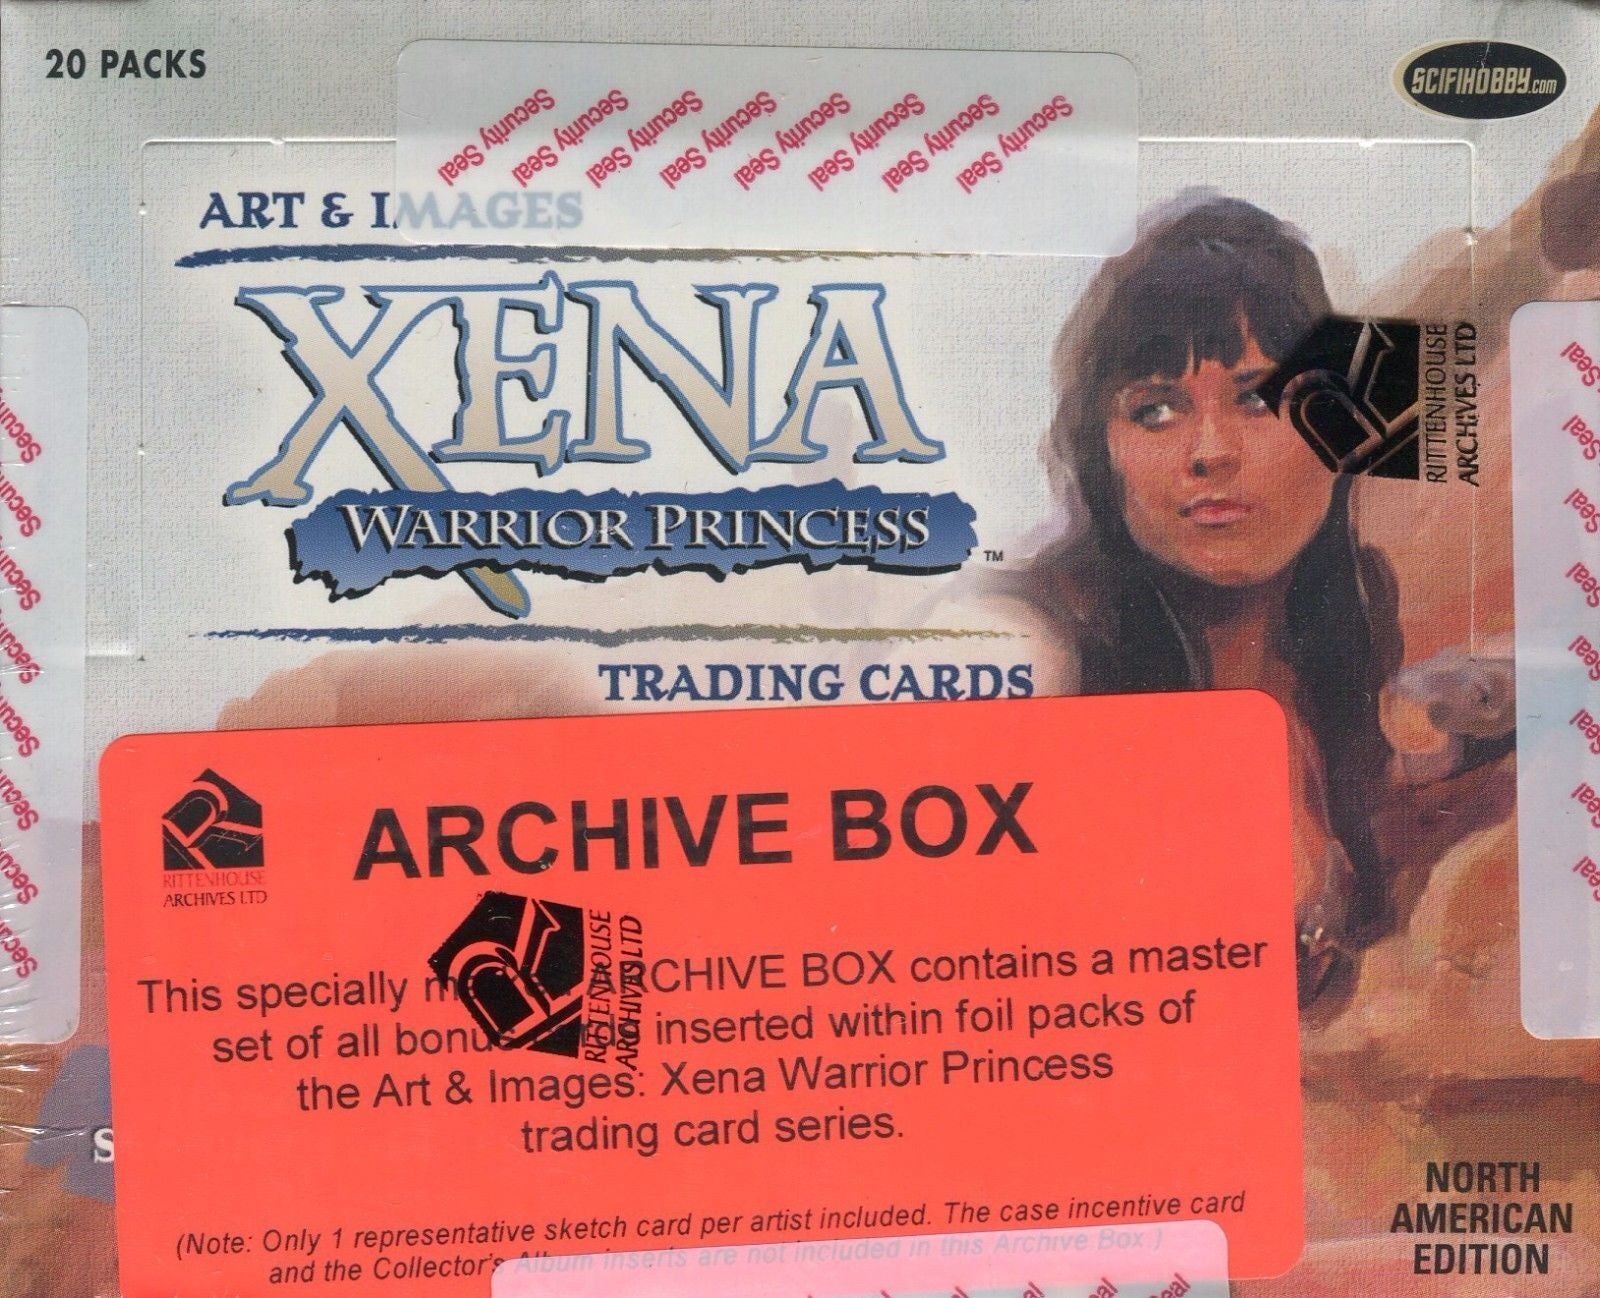 2004 Xena Warrior Princess Art & Images Archive Trading Card Box